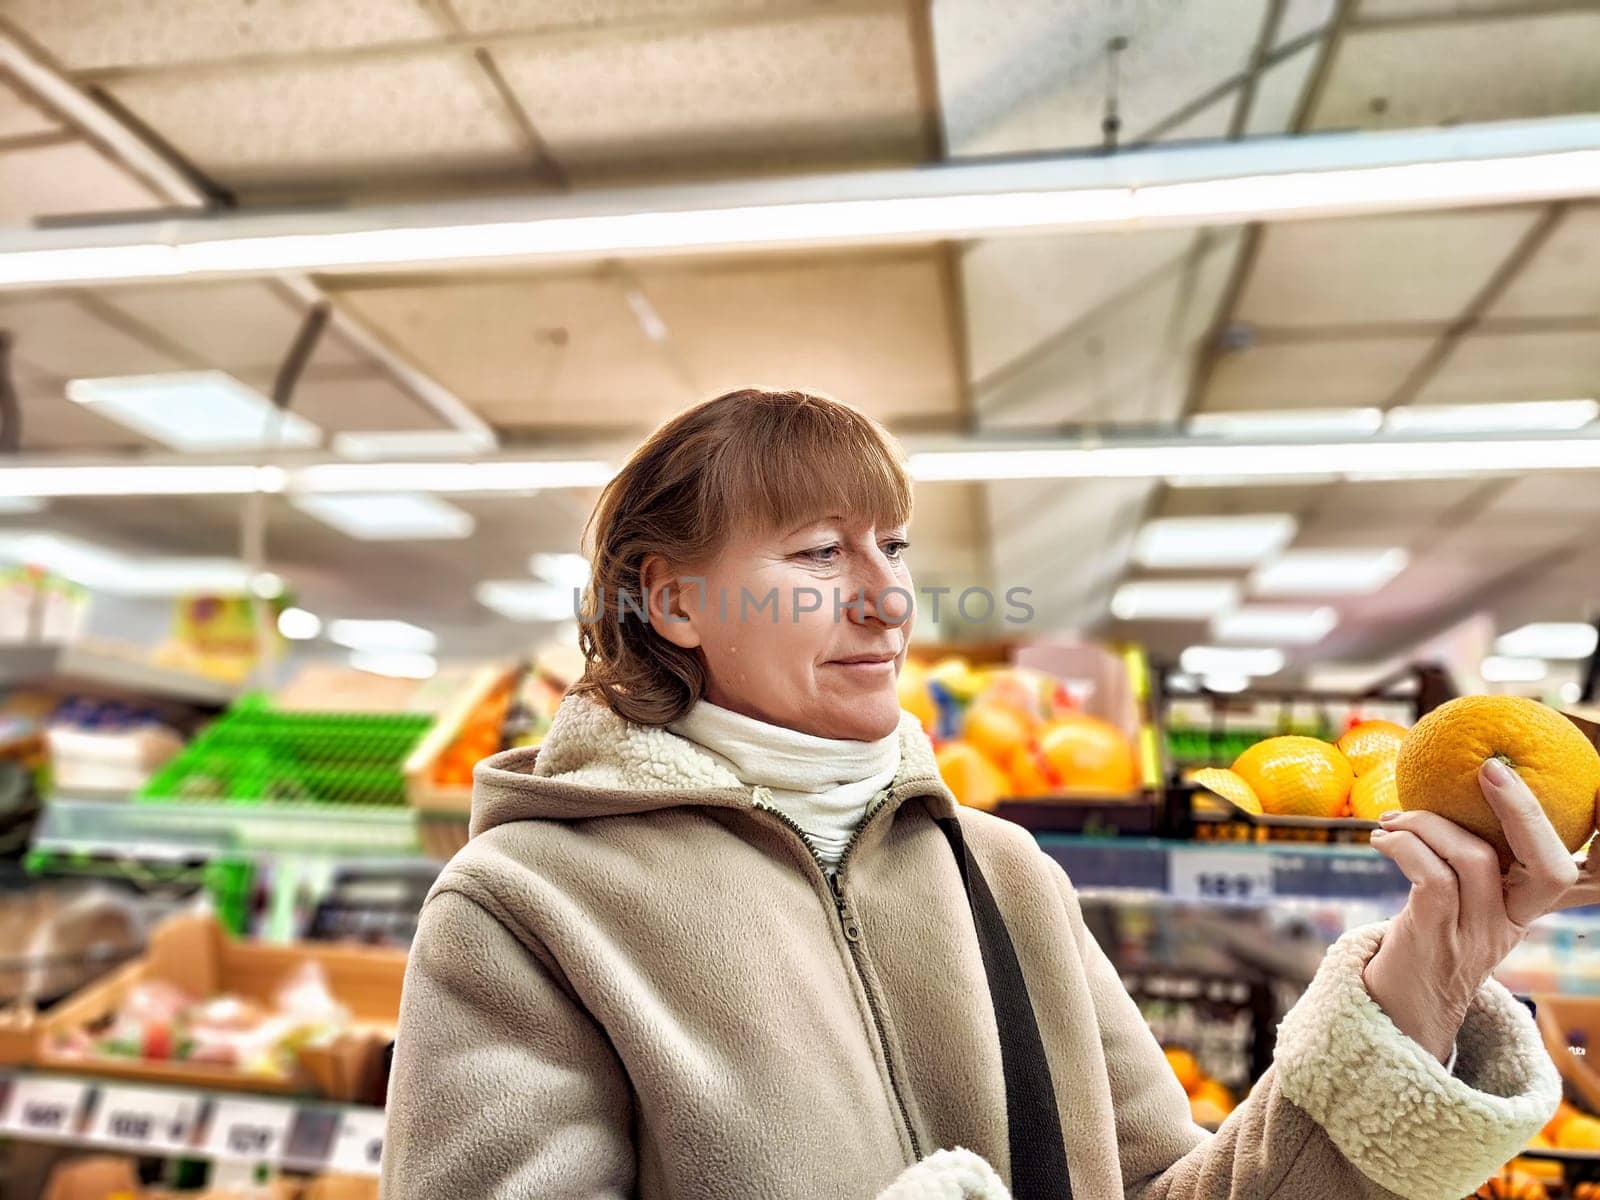 Middle-Aged Woman Holding an Orange in a Grocery Store. Woman examines an orange, considering nutrition in a store aisle. Concept of proper nutrition by keleny